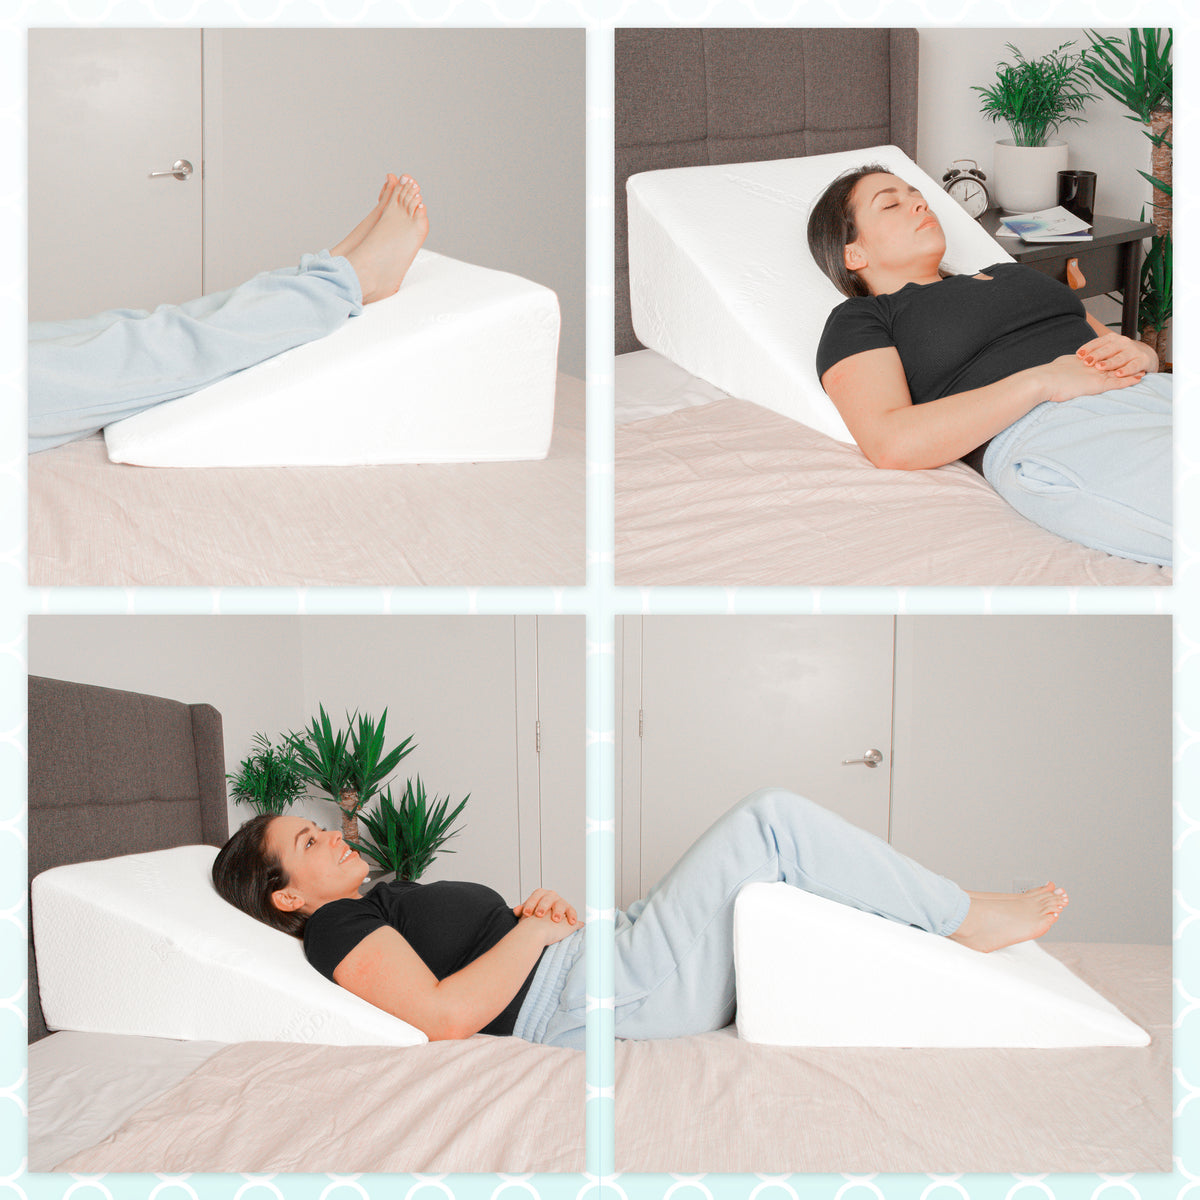 A collage of images showing various wedge pillow uses